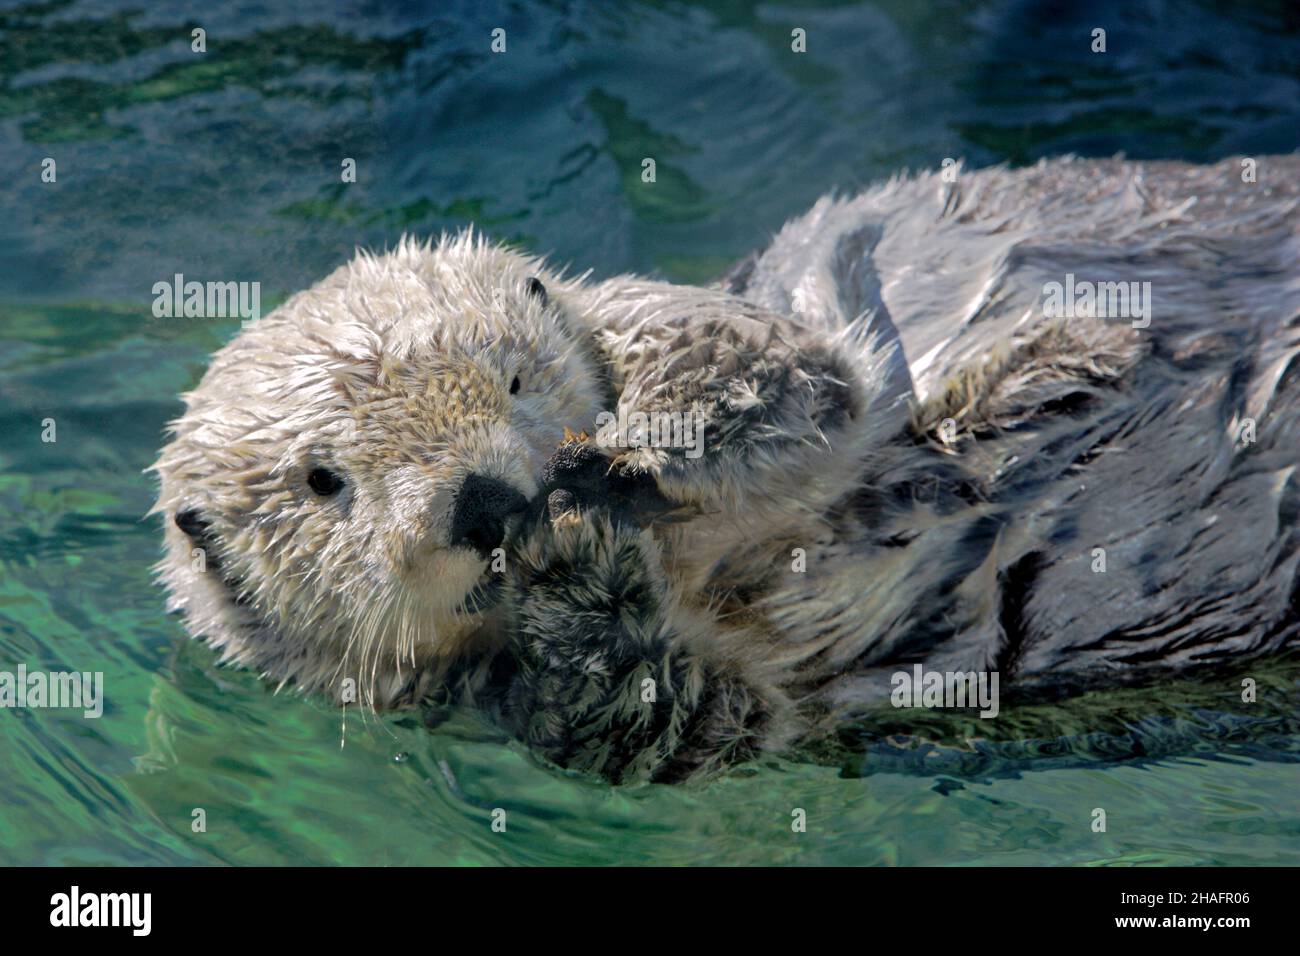 Cute Sea otter floating on its back, holding his paws together, watching interested. Stock Photo